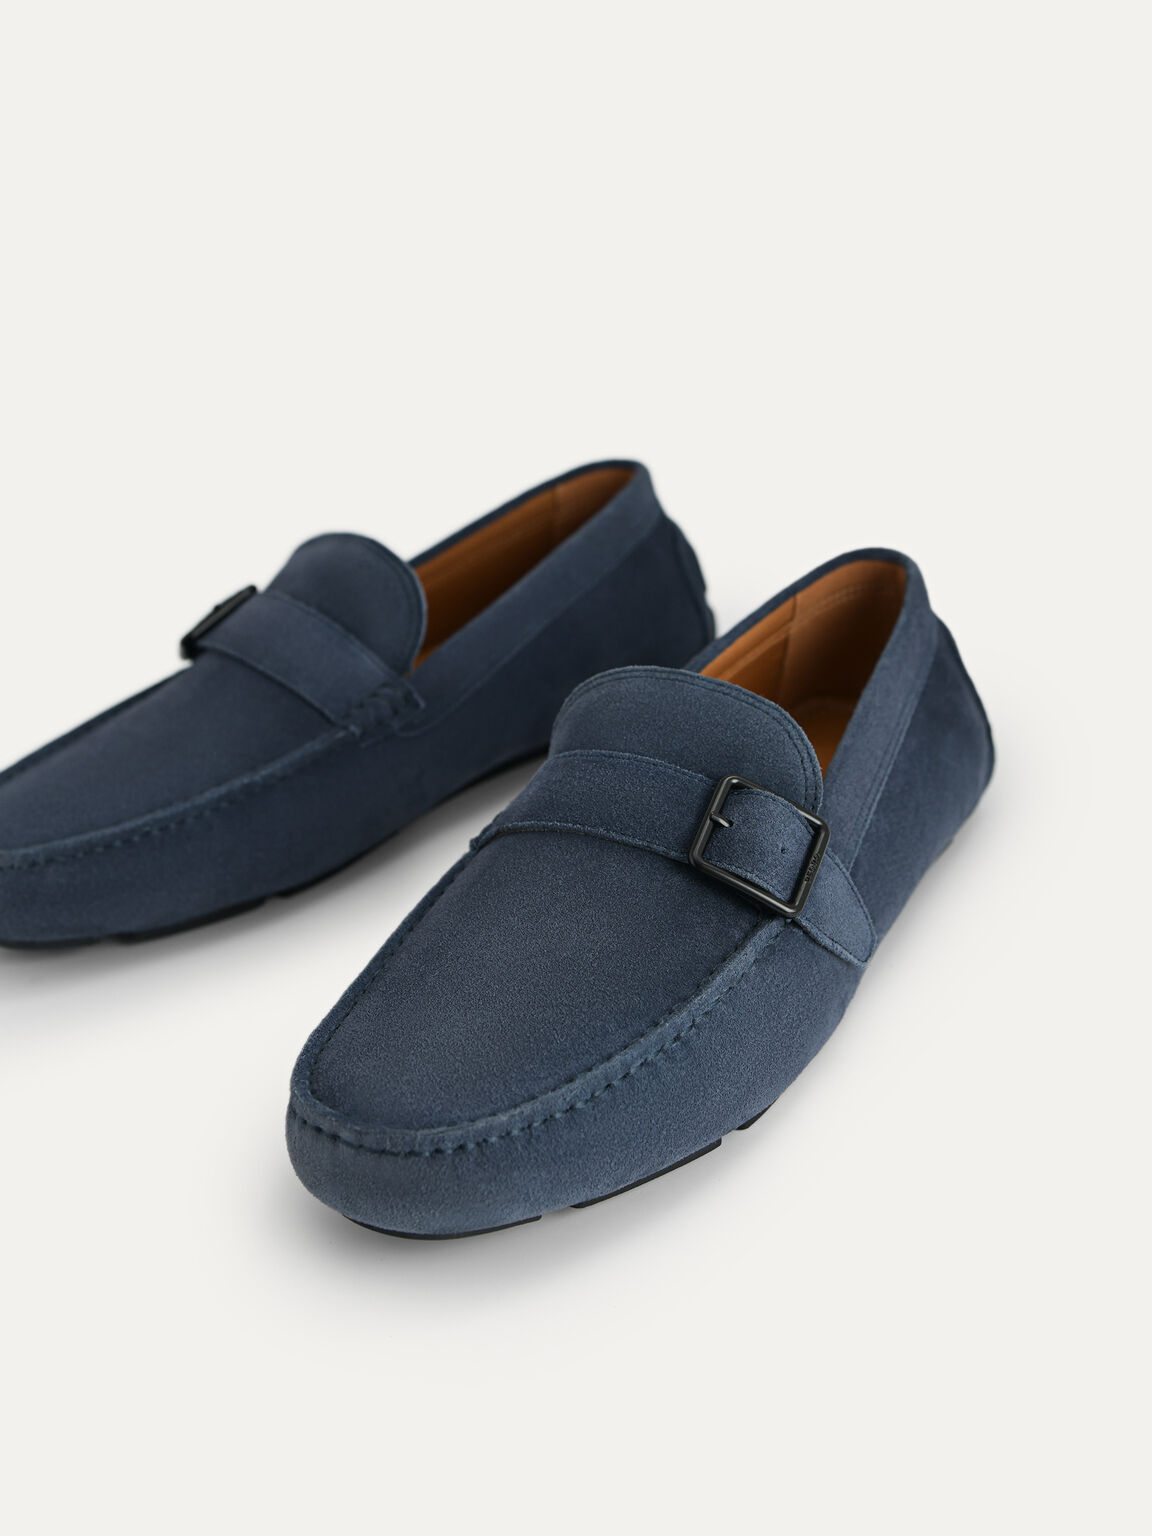 Suede Leather Moccasins with Buckle Detailing, Navy